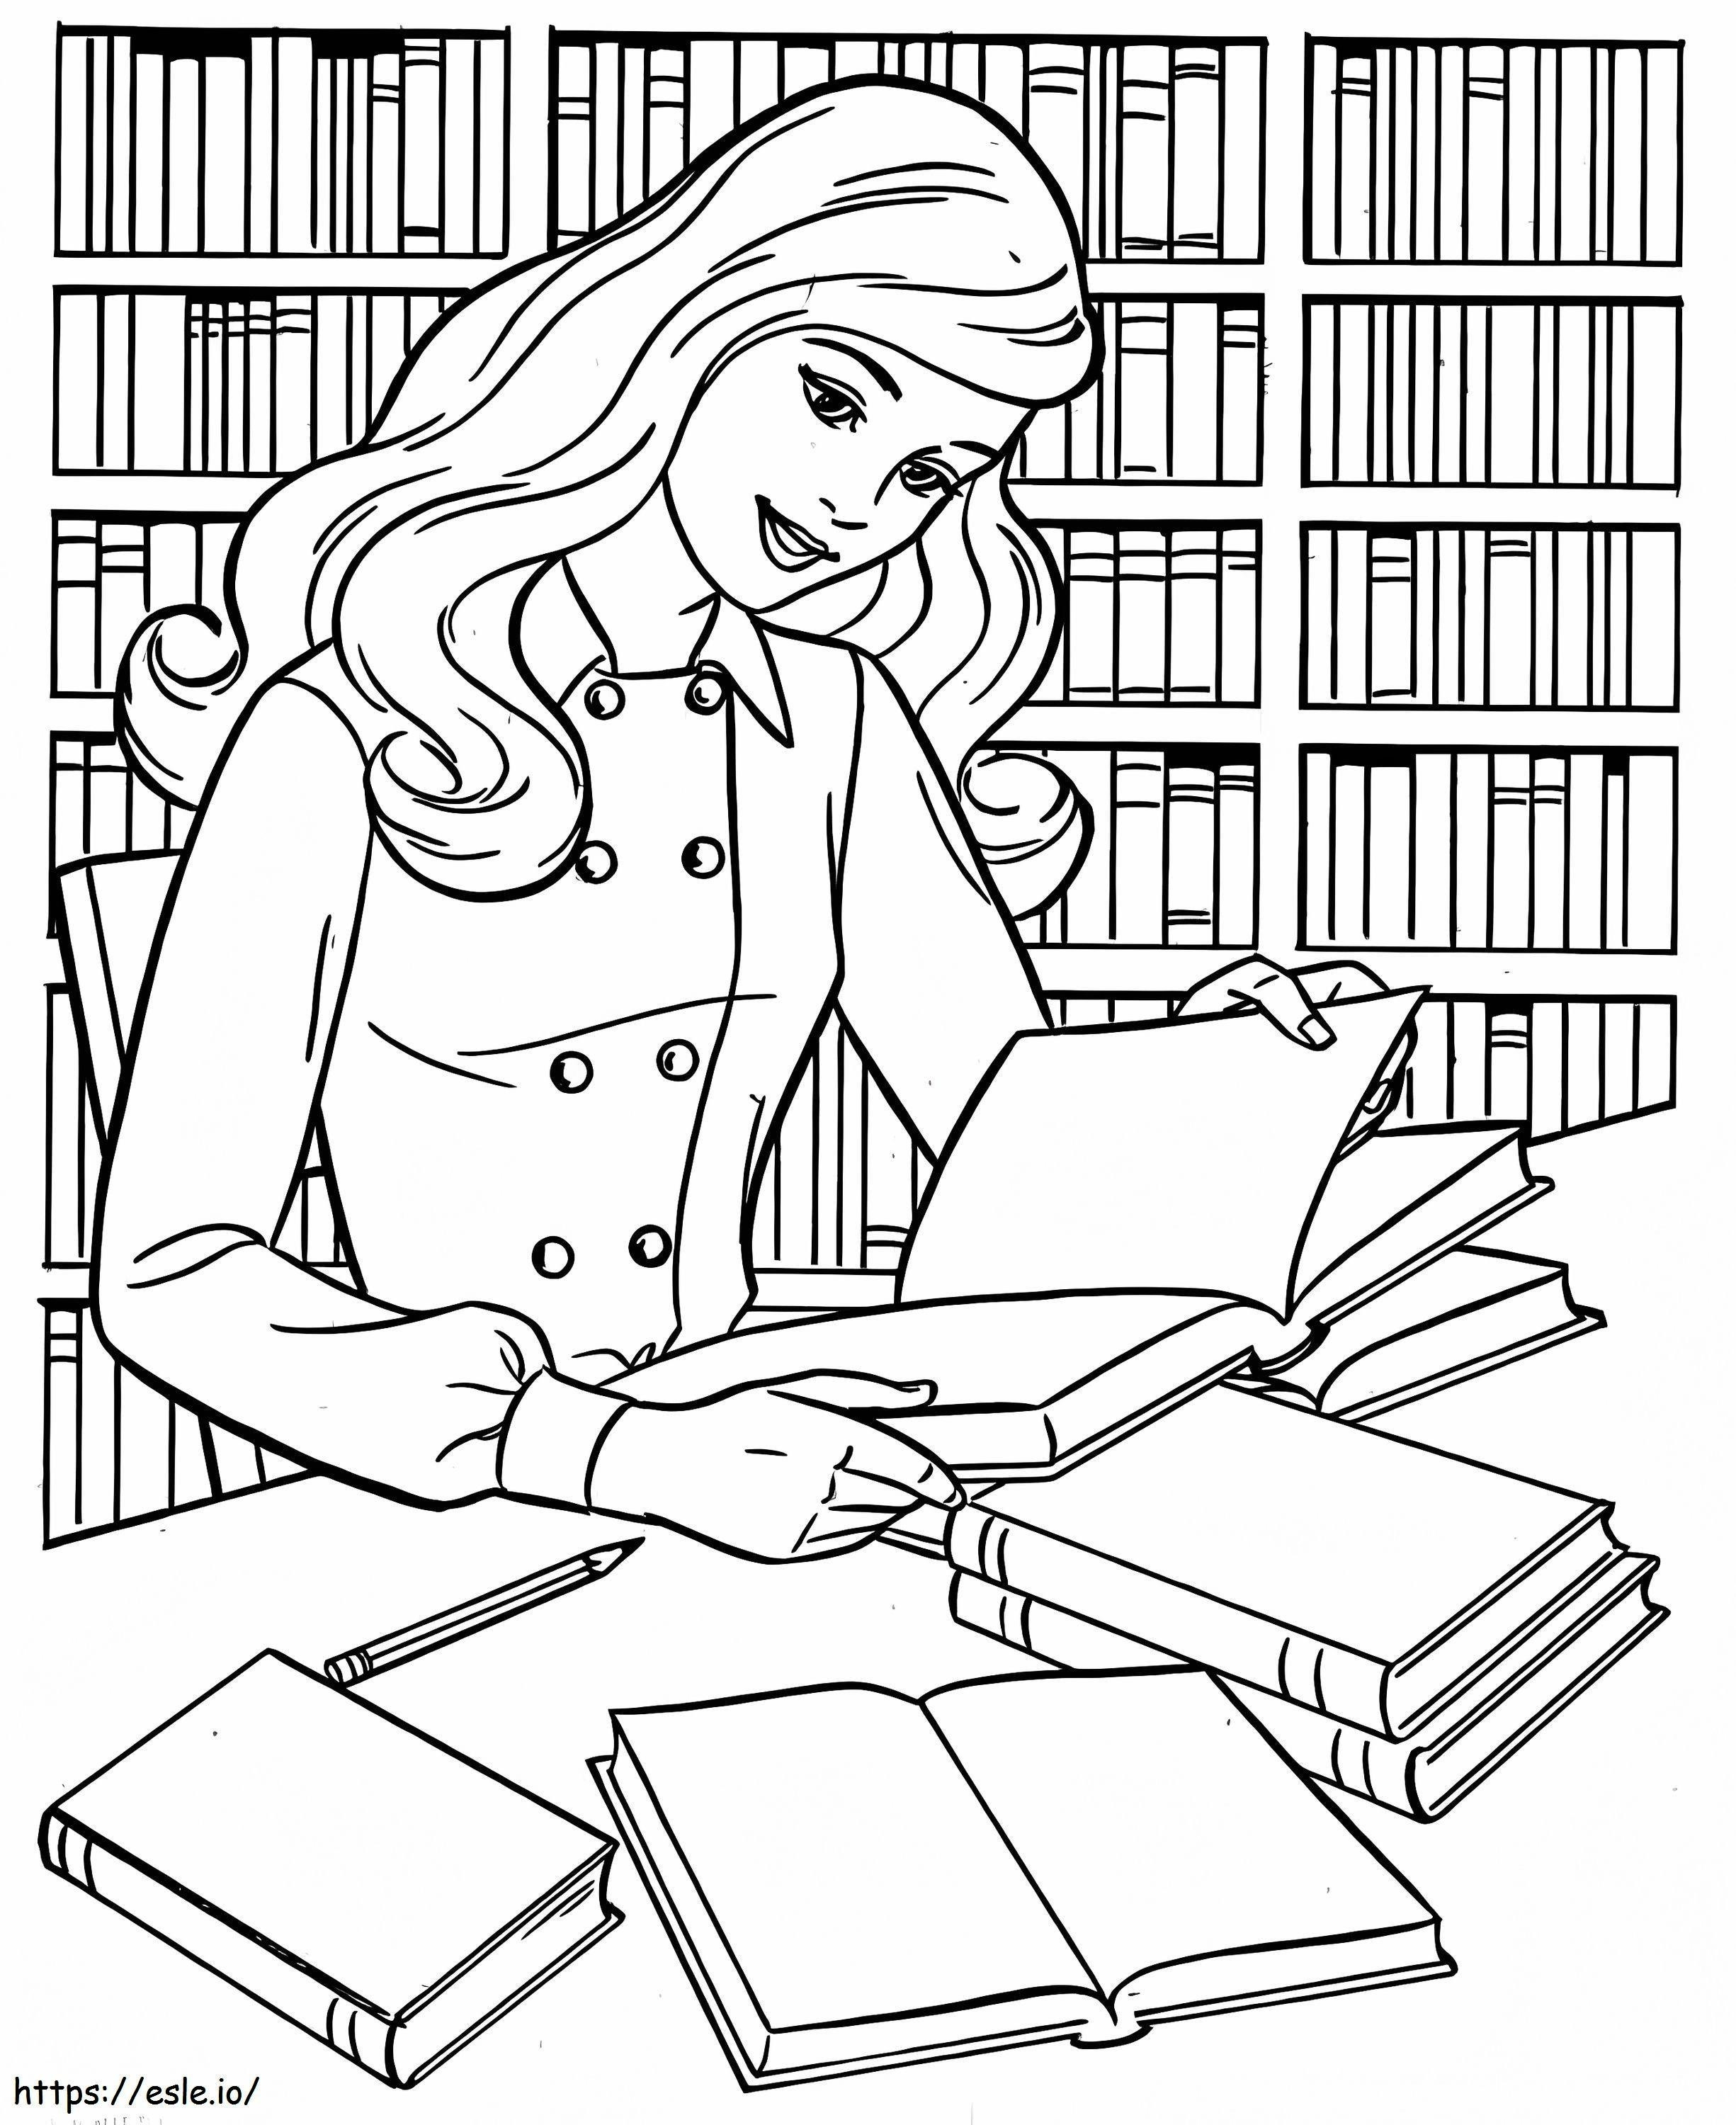 Nina Reading A Book In The School Library coloring page